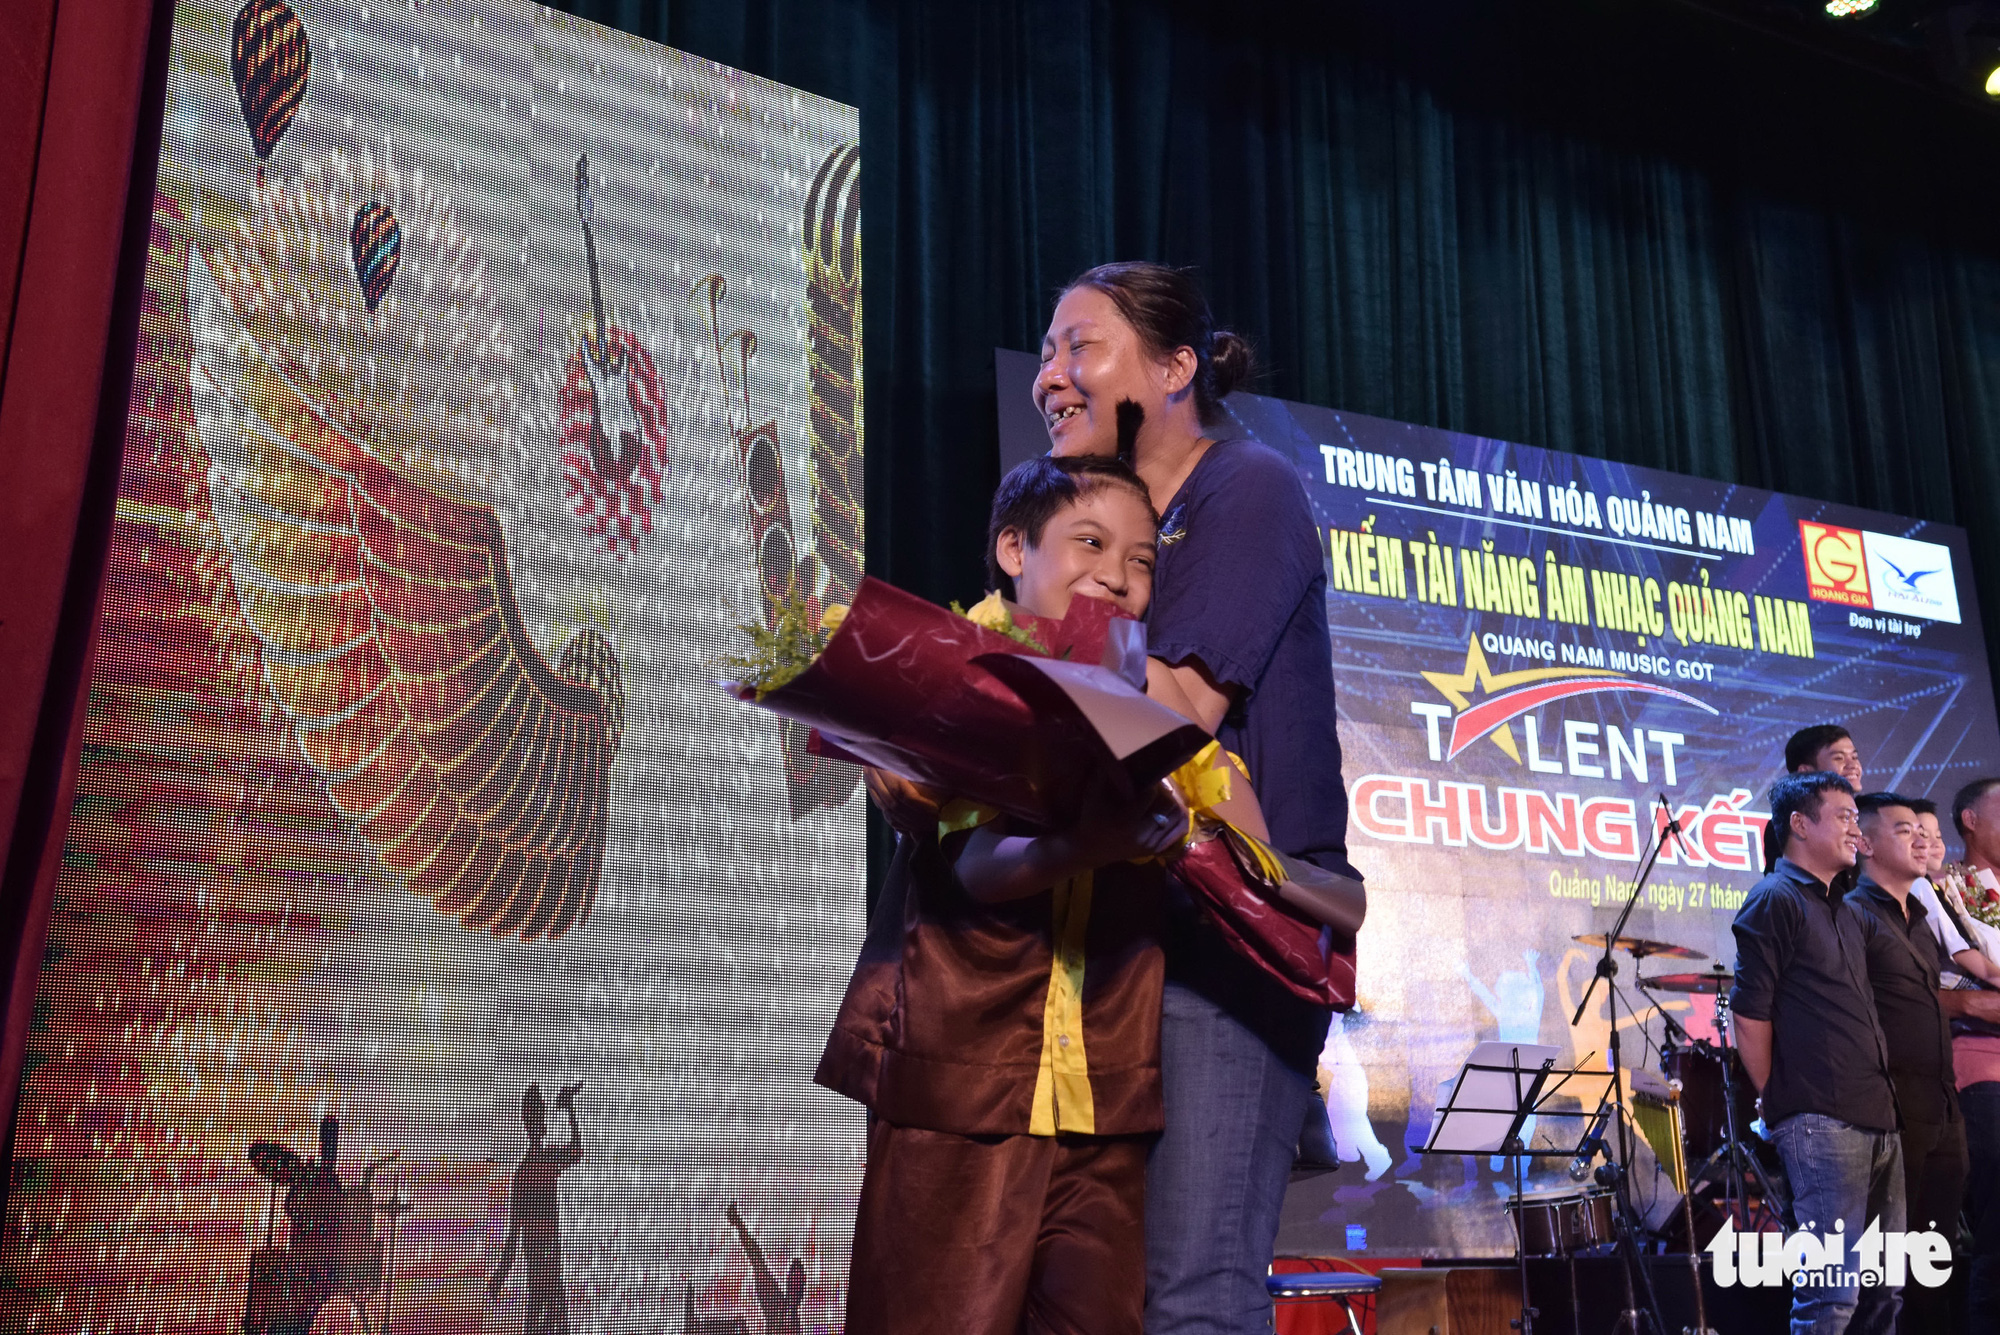 Nguyen Tuong Van, Nguyen Ngoc Thien Thanh’s mother, bursts into tears as he pocketed a prize at the Quang Nam Music Got Talent Competition’s Final Round, which took place in the namesake province in central Vietnam in July 2020 in this supplied photo.